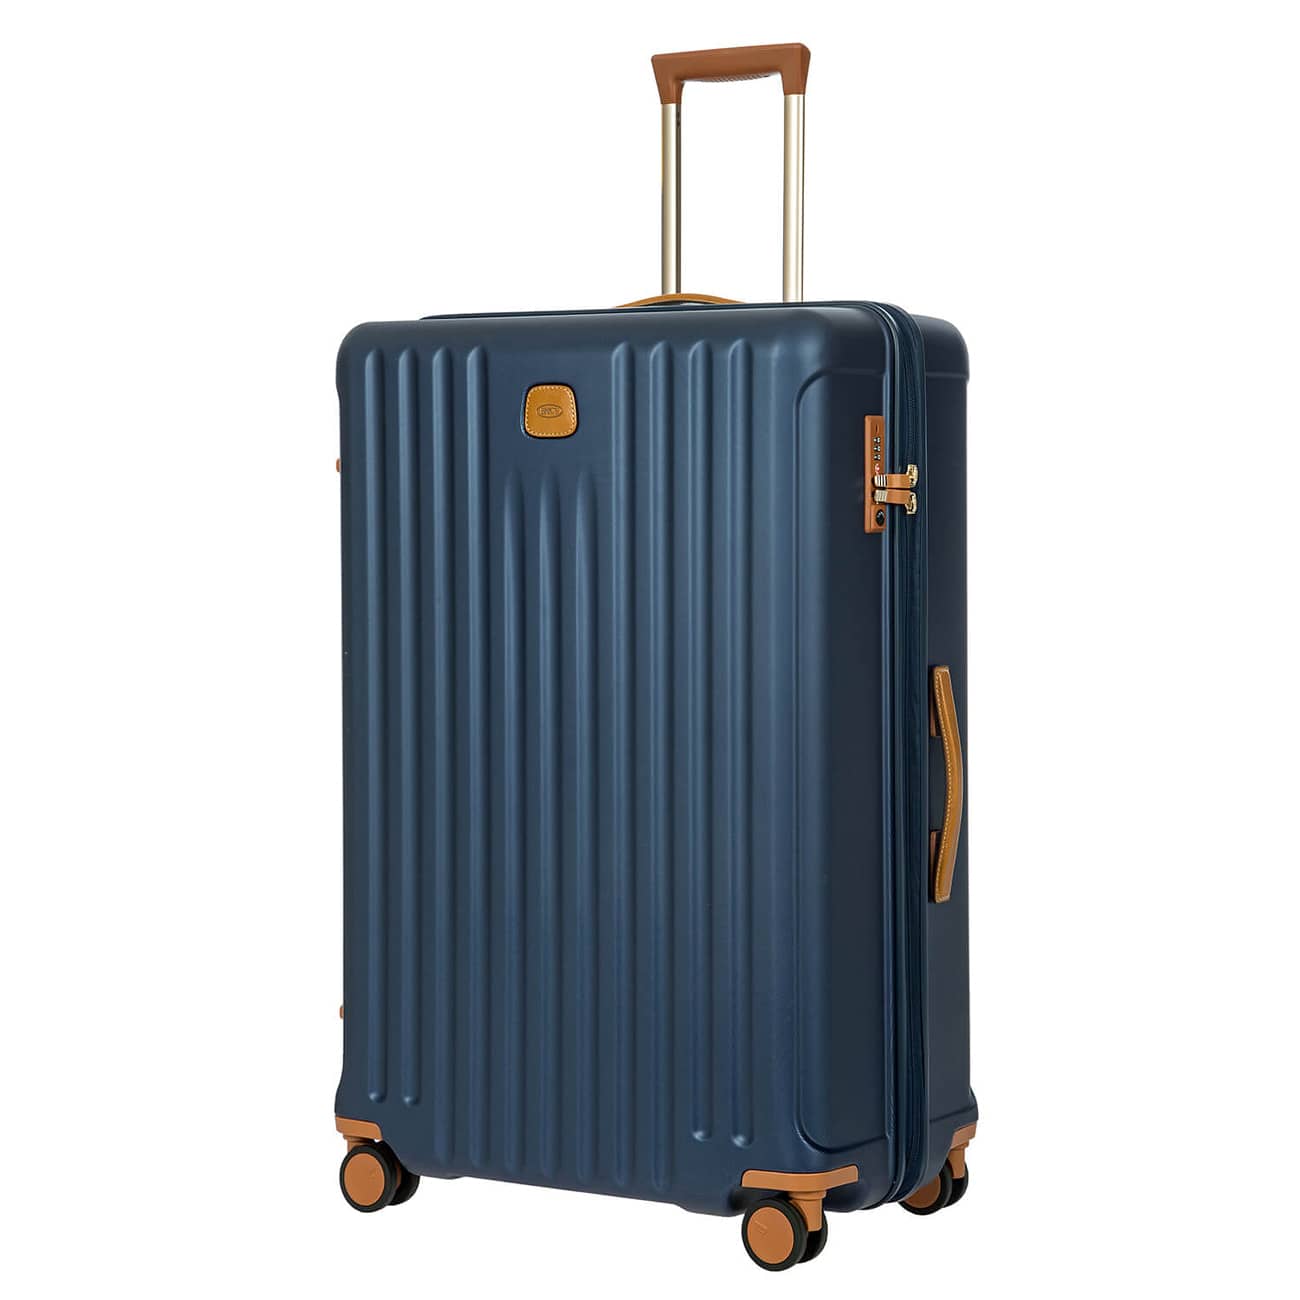 Best large checked luggage